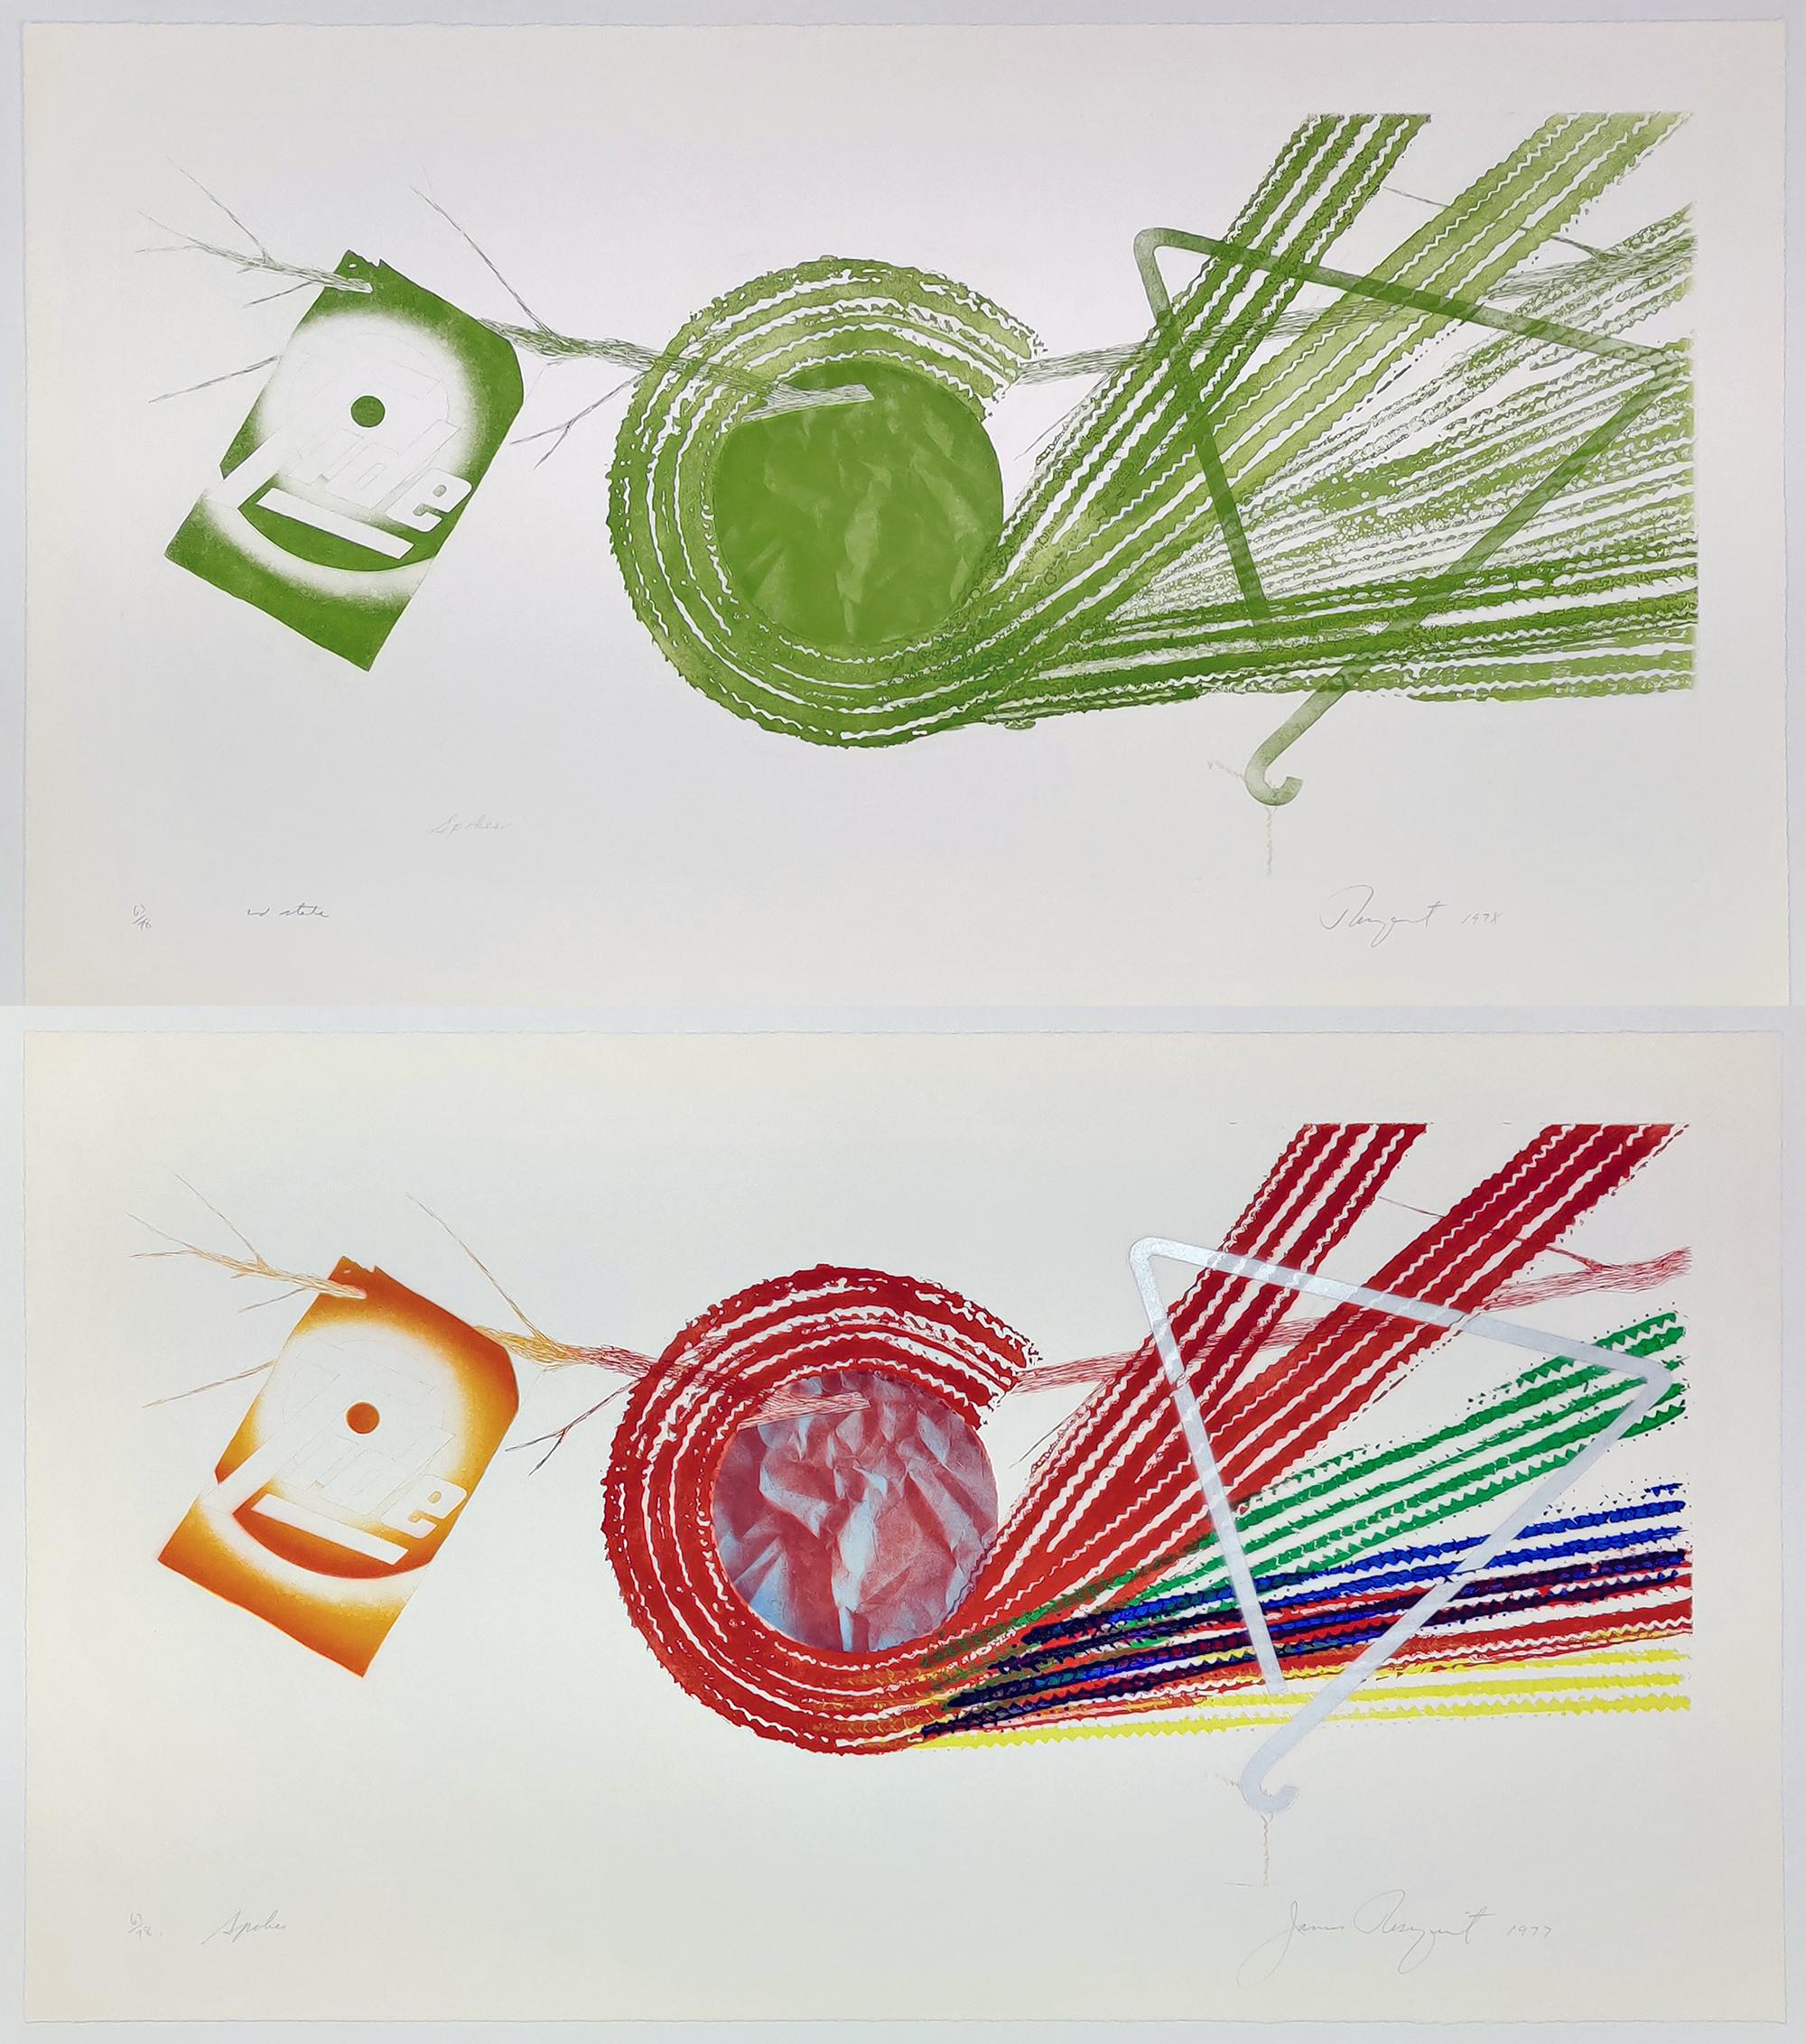 SPOKES AND SPOKES: 2 STATE - Print by James Rosenquist